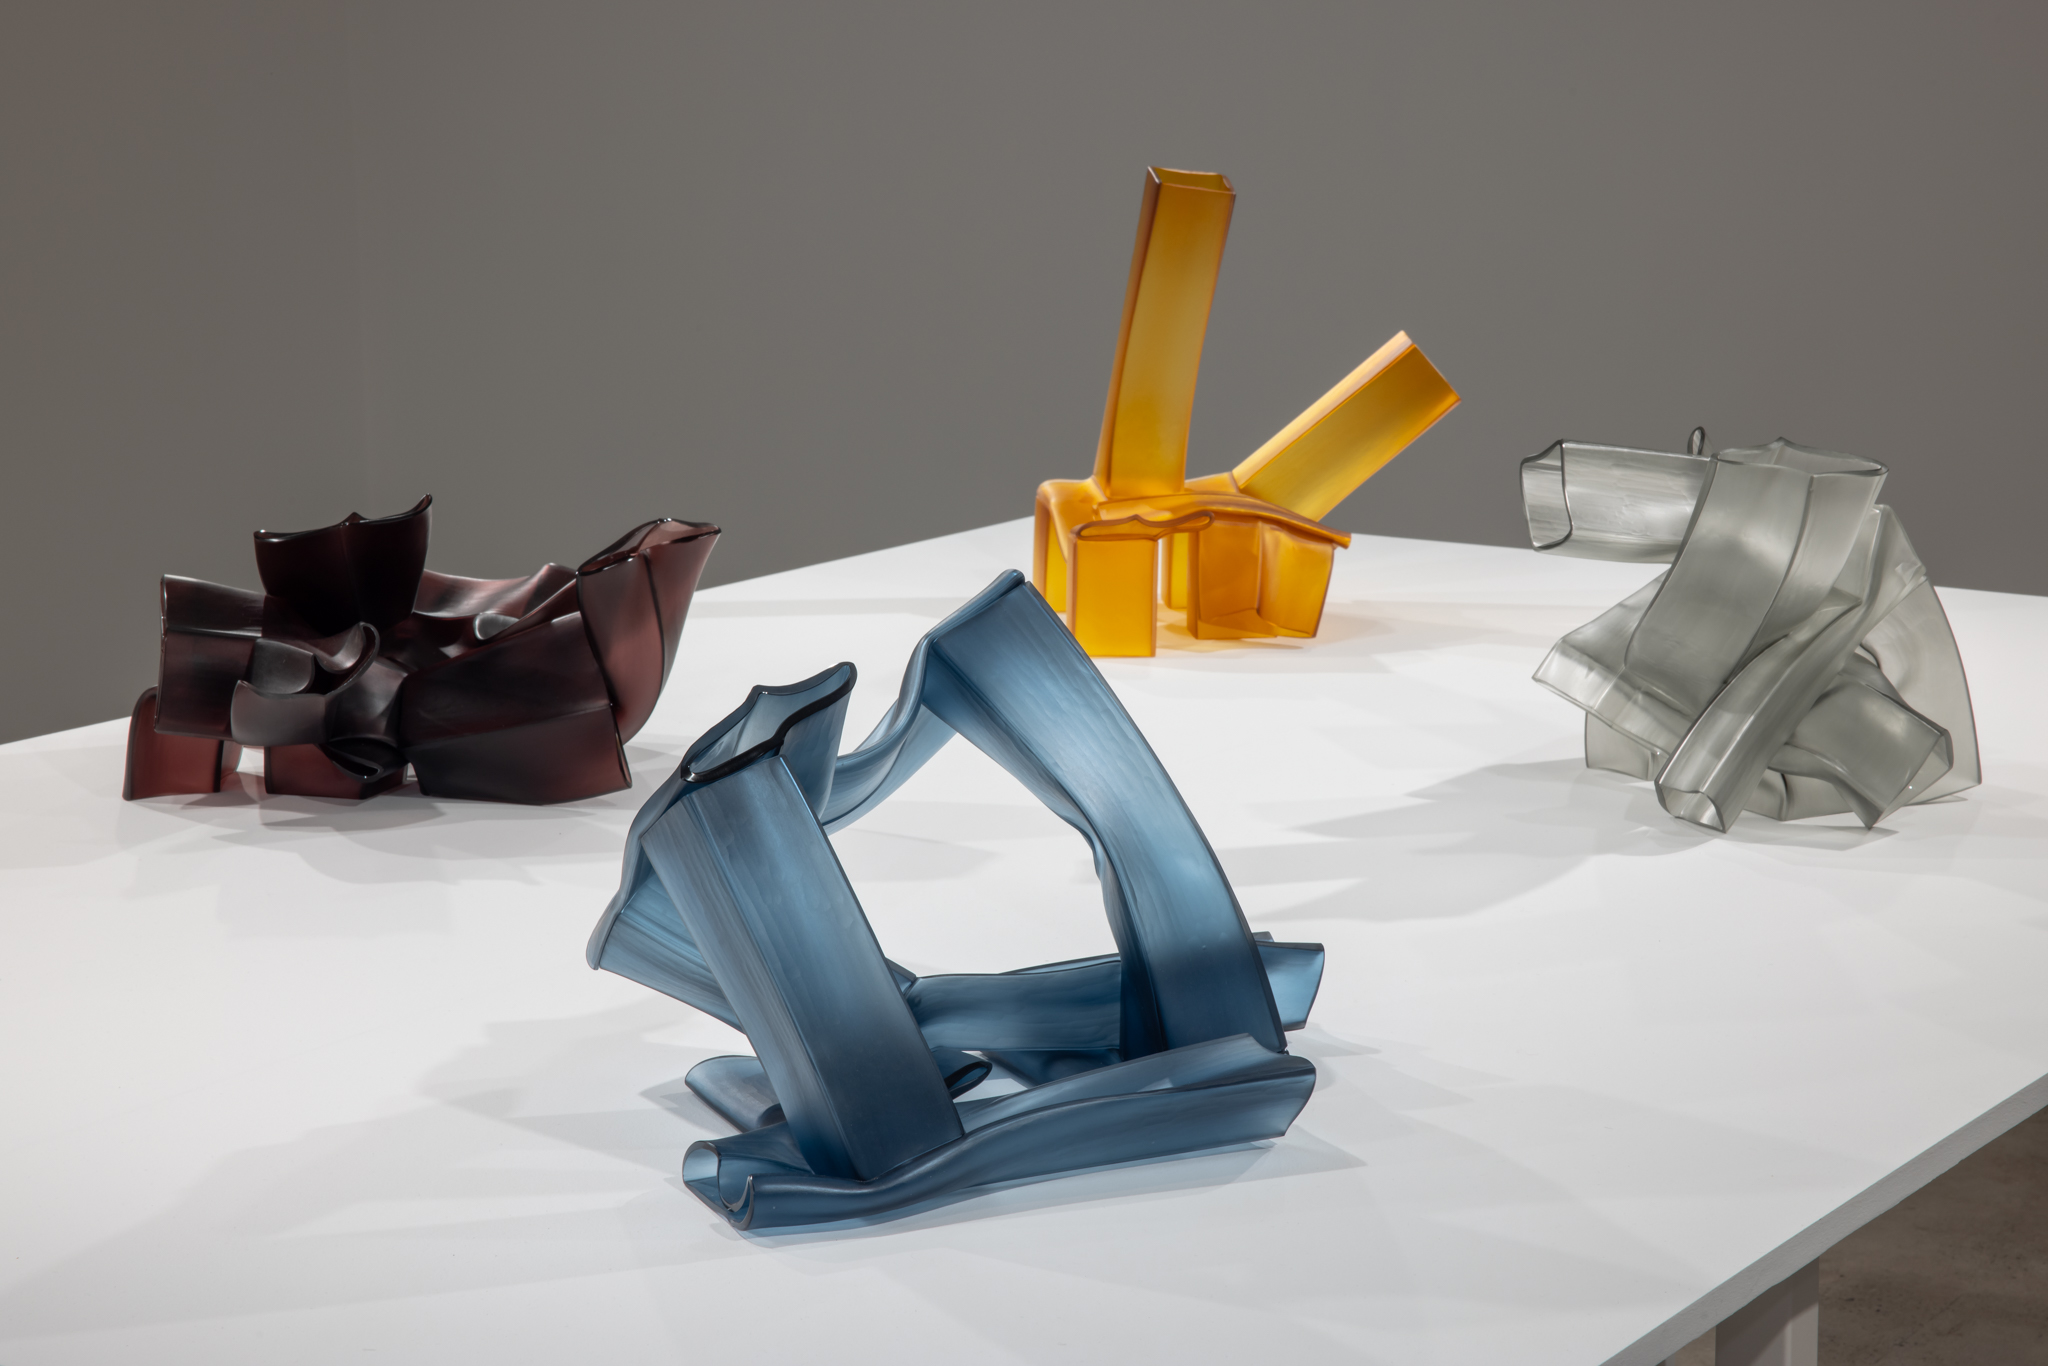 unswgalleries_glass_181022_credit_jacquiemanning-18.jpg